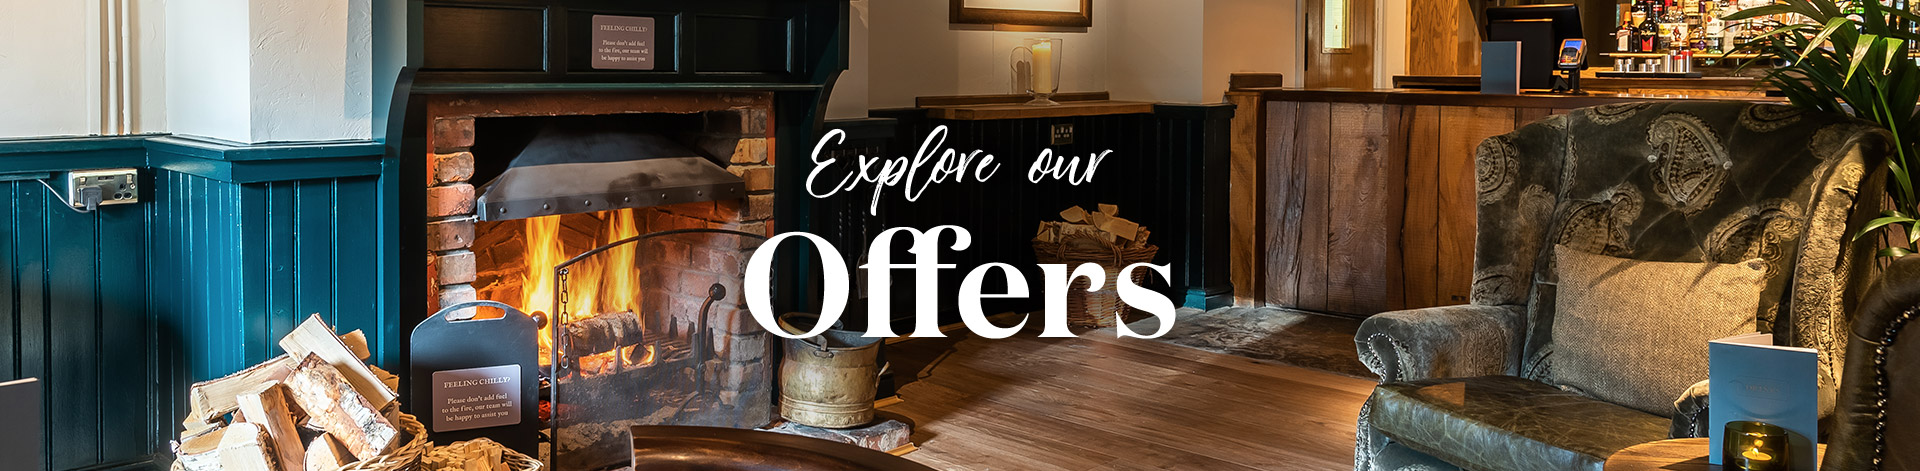 Our latest offers at Ye Olde Greene Manne